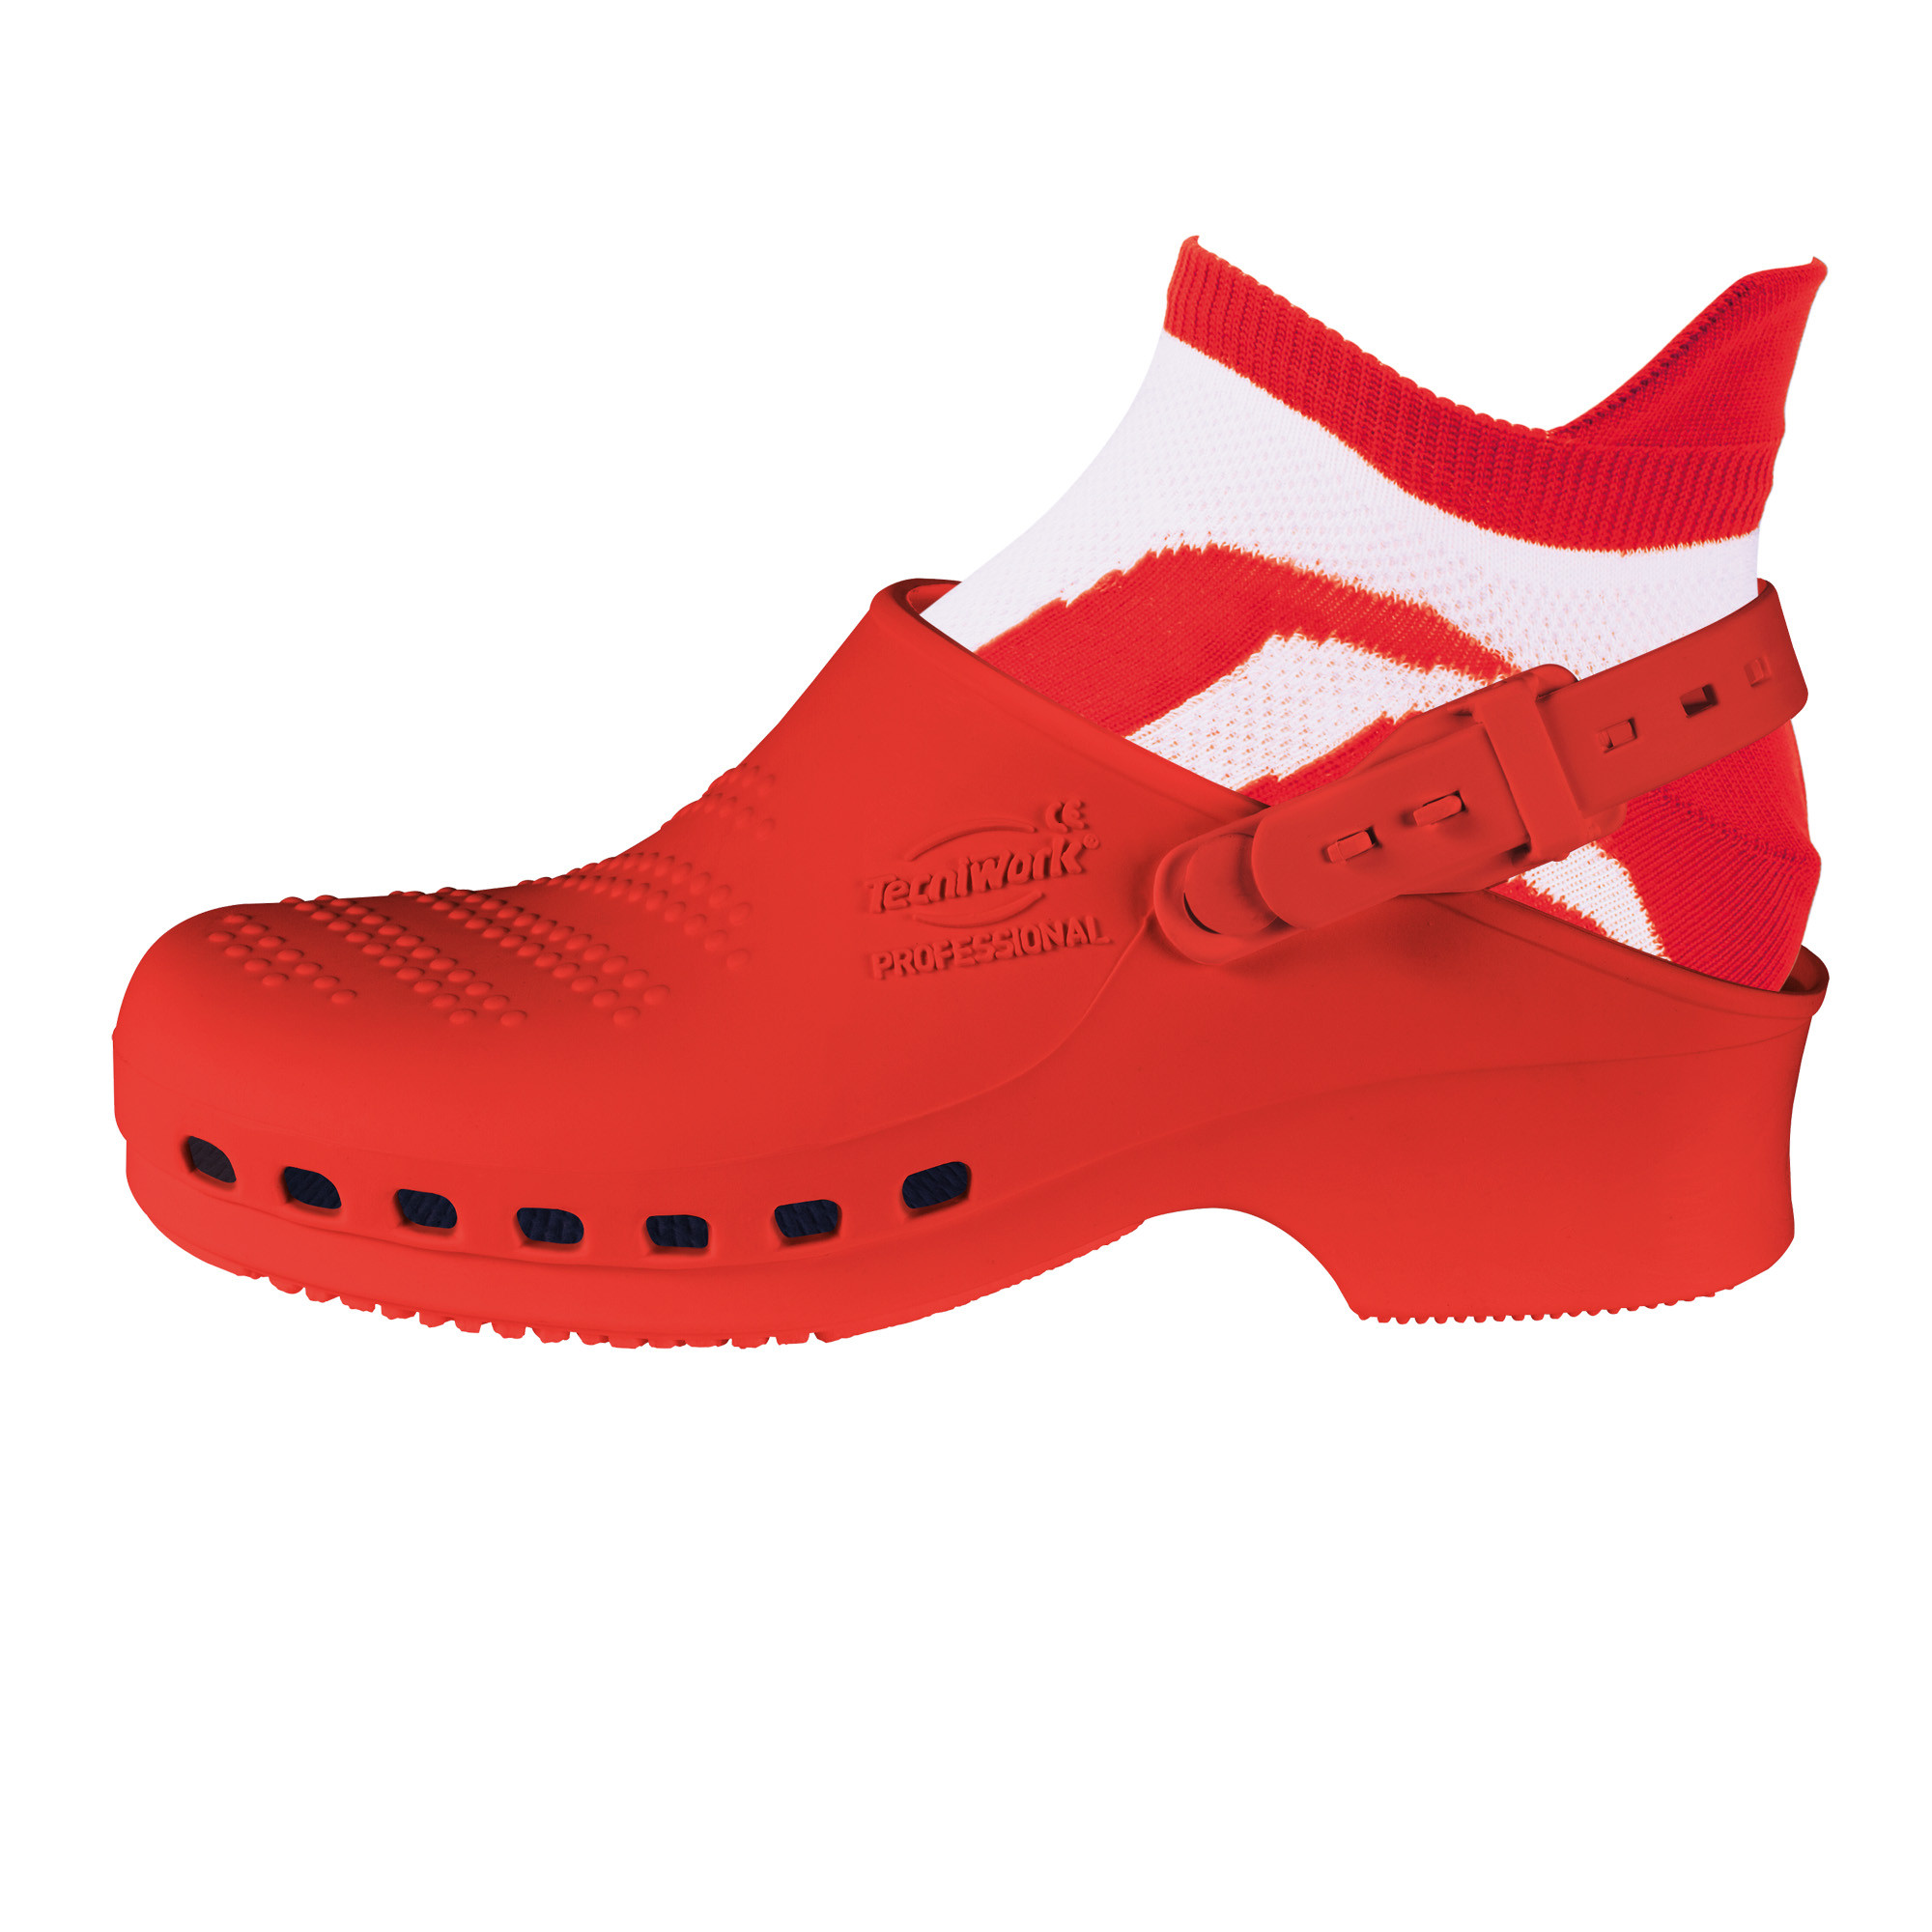 Professional sanitary clogs red Size 41/42